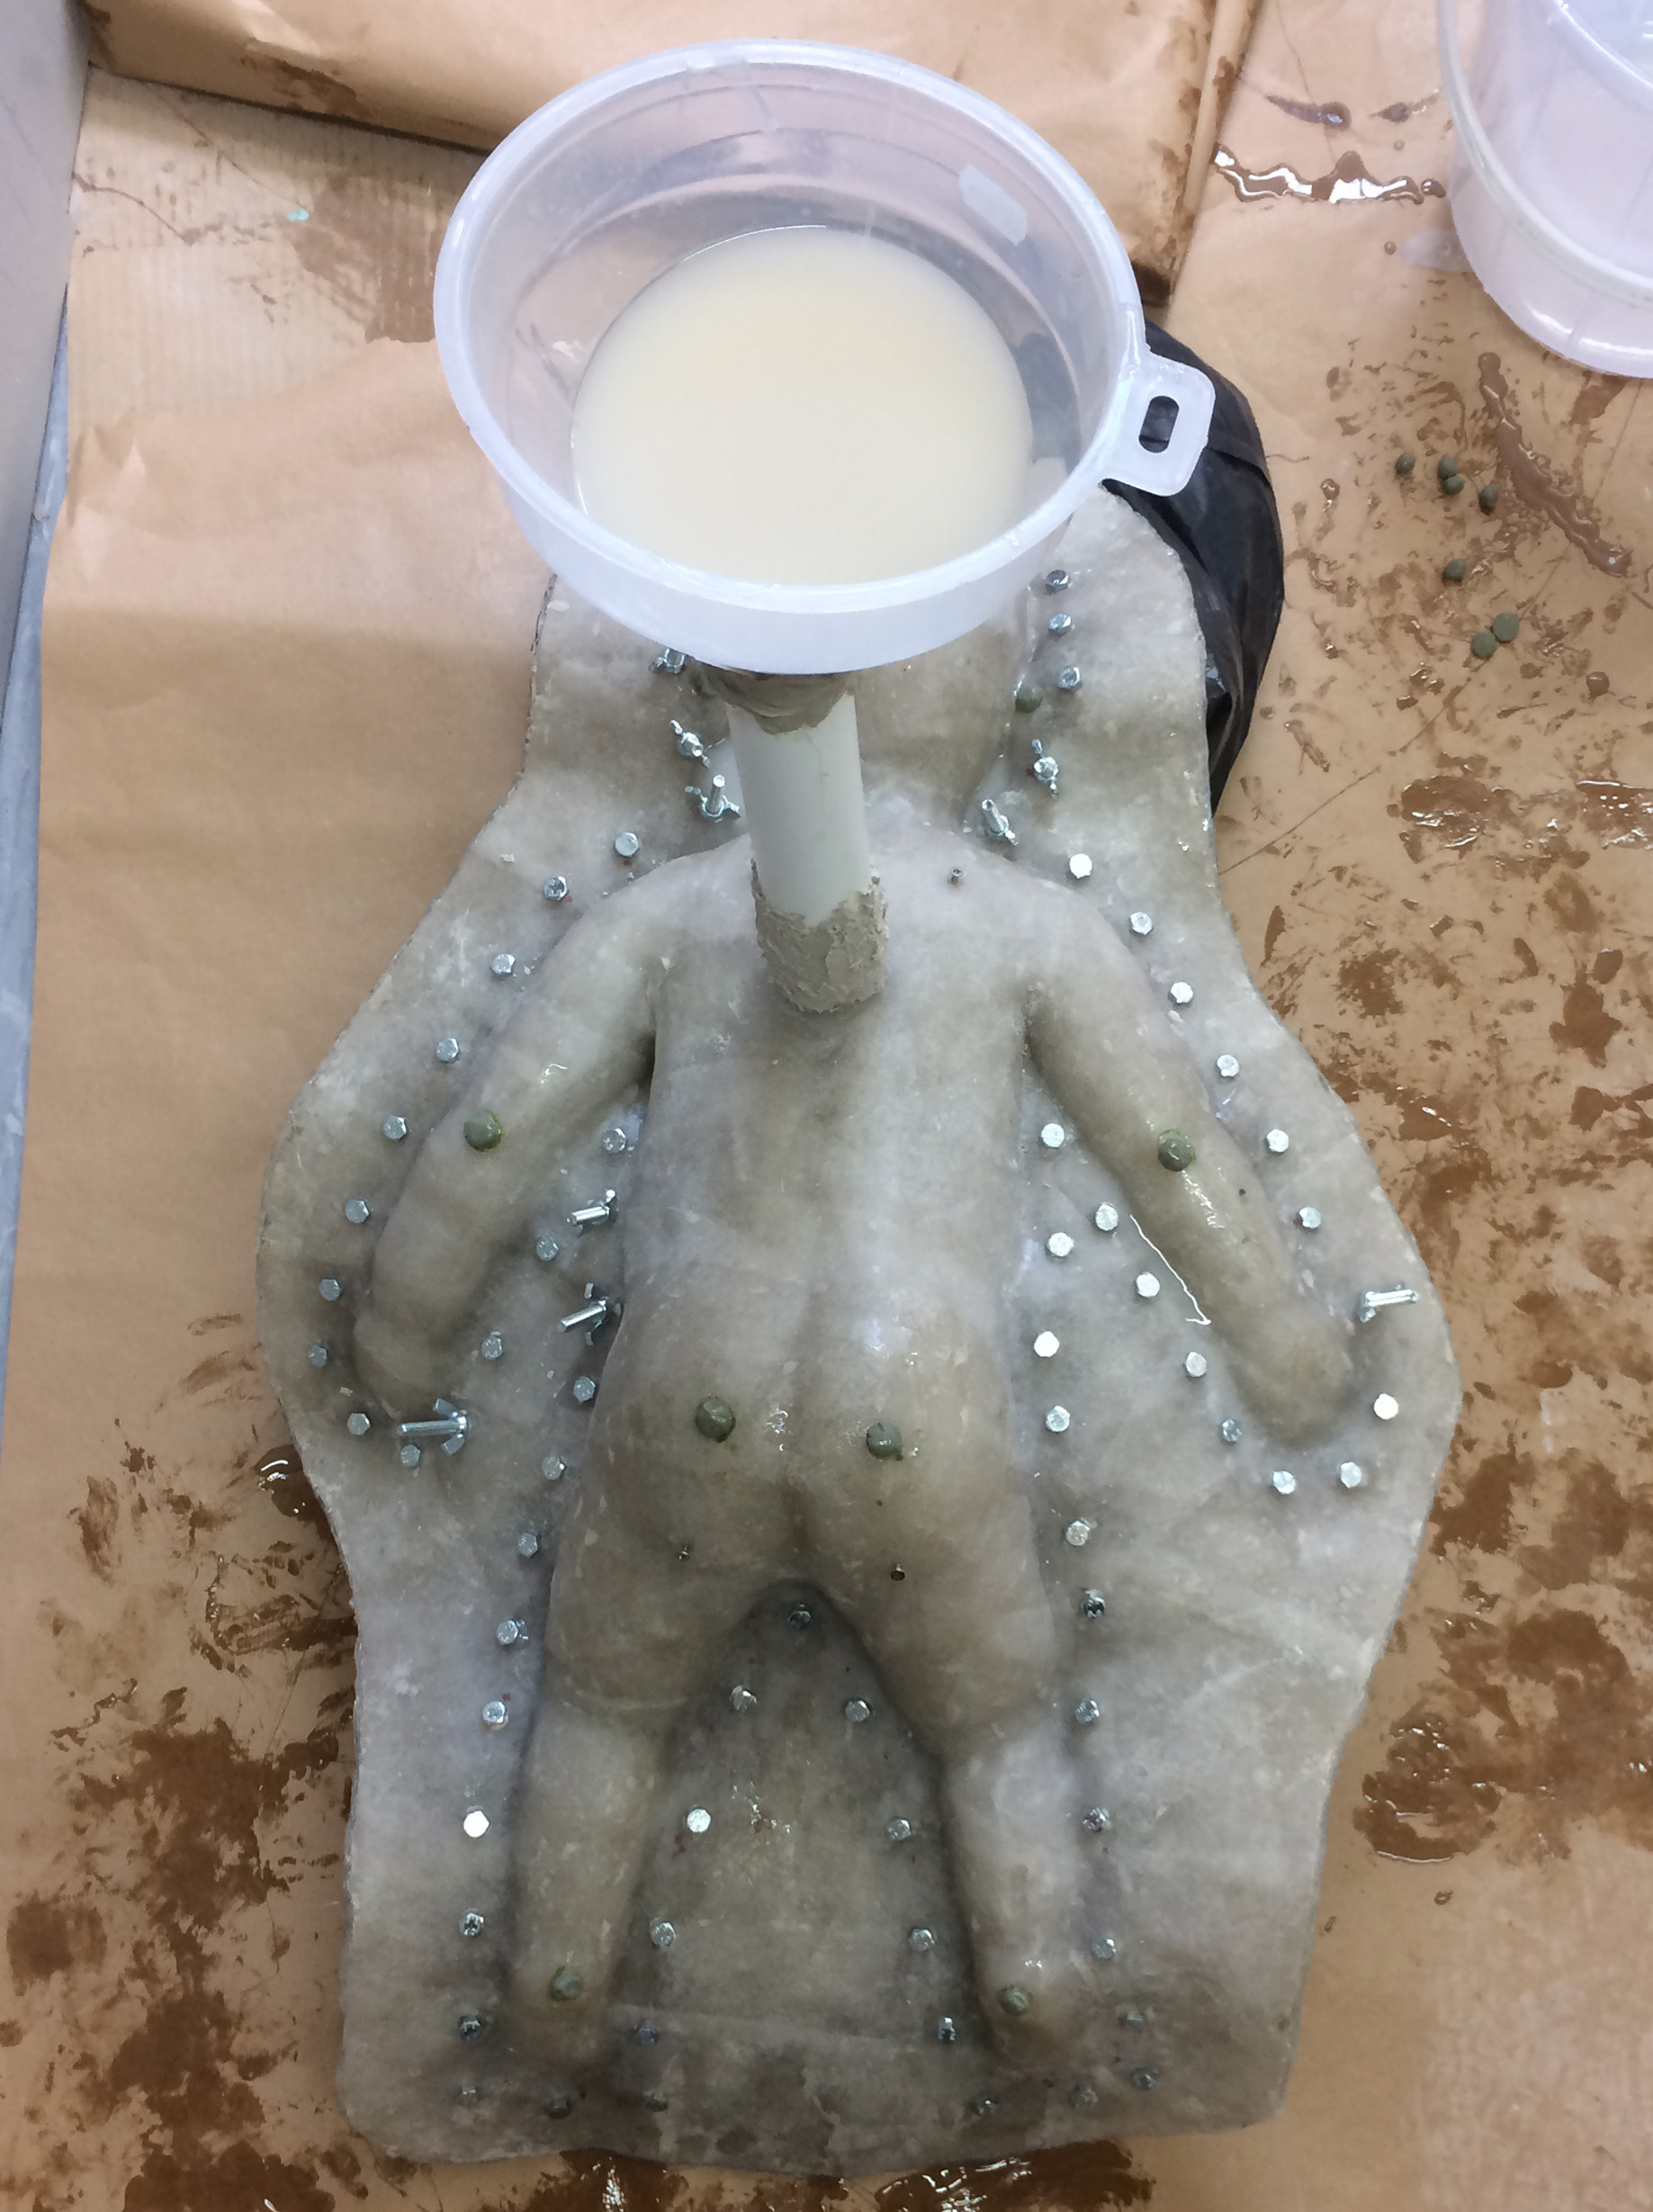 Silicone pour in fibreglass mould tinsil gel